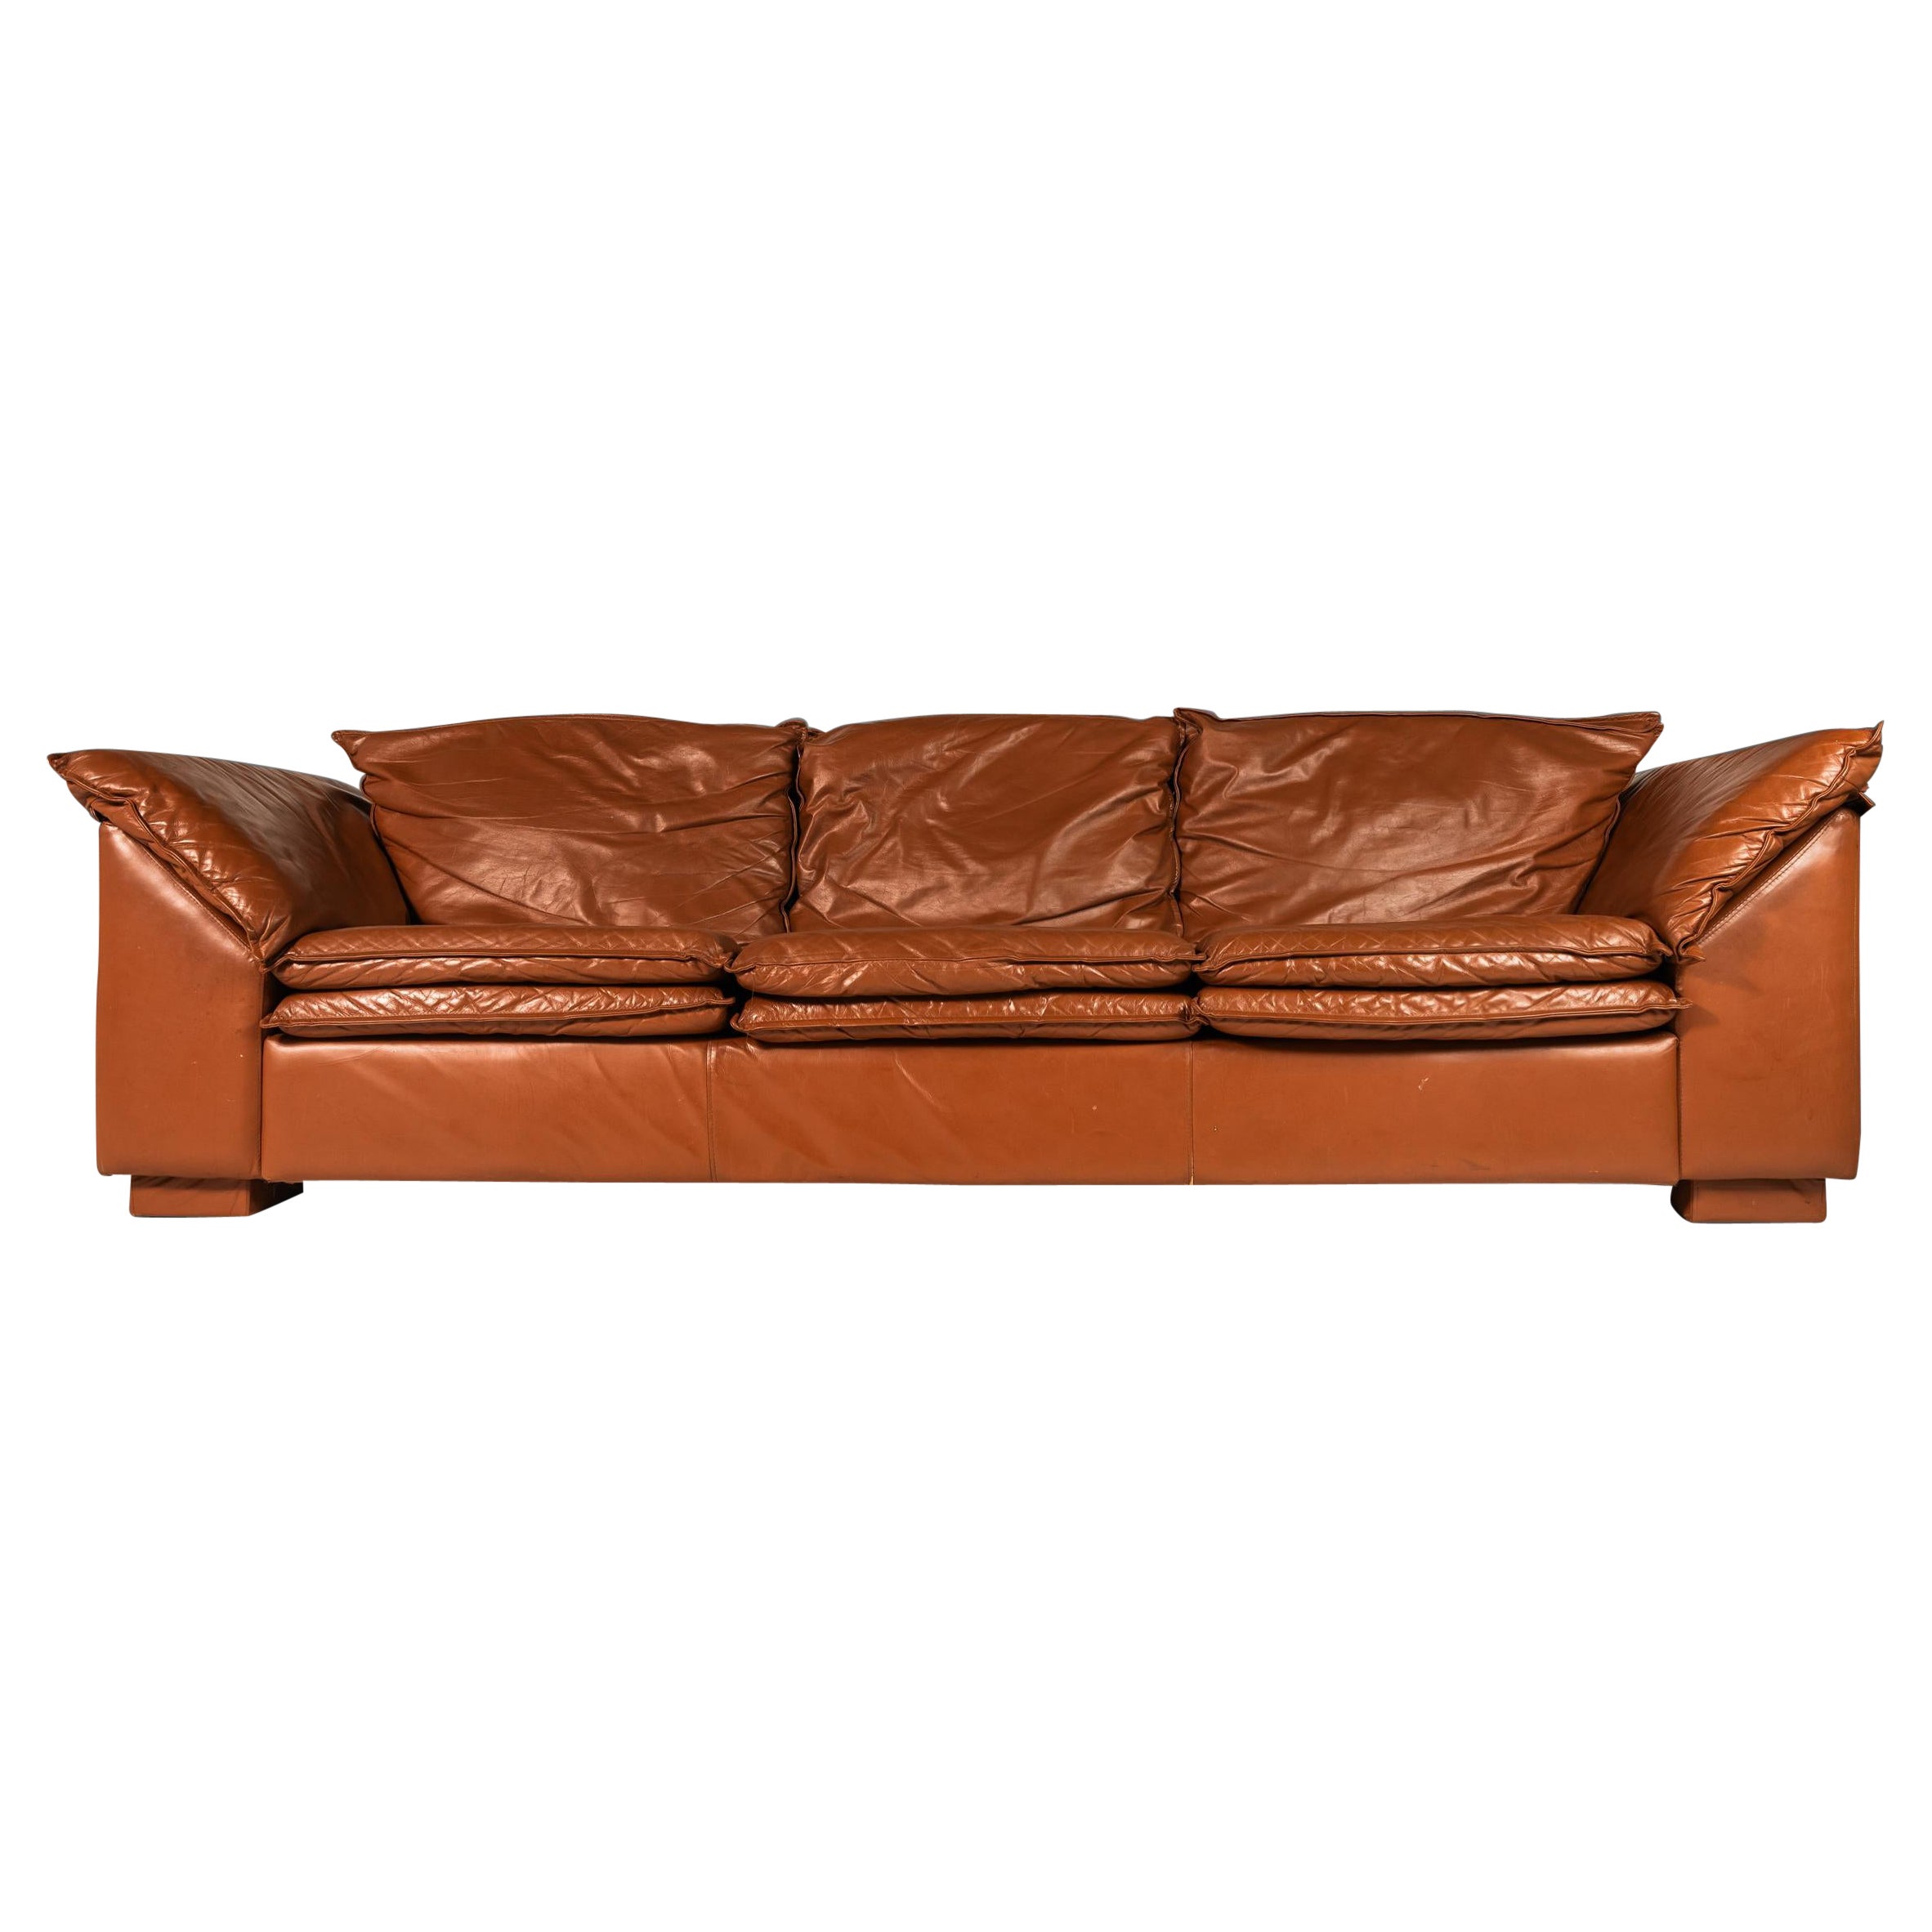 Low Profile Sofa in Cognac Brown Leather in the Manner of Niels Eilersen, 1980's For Sale